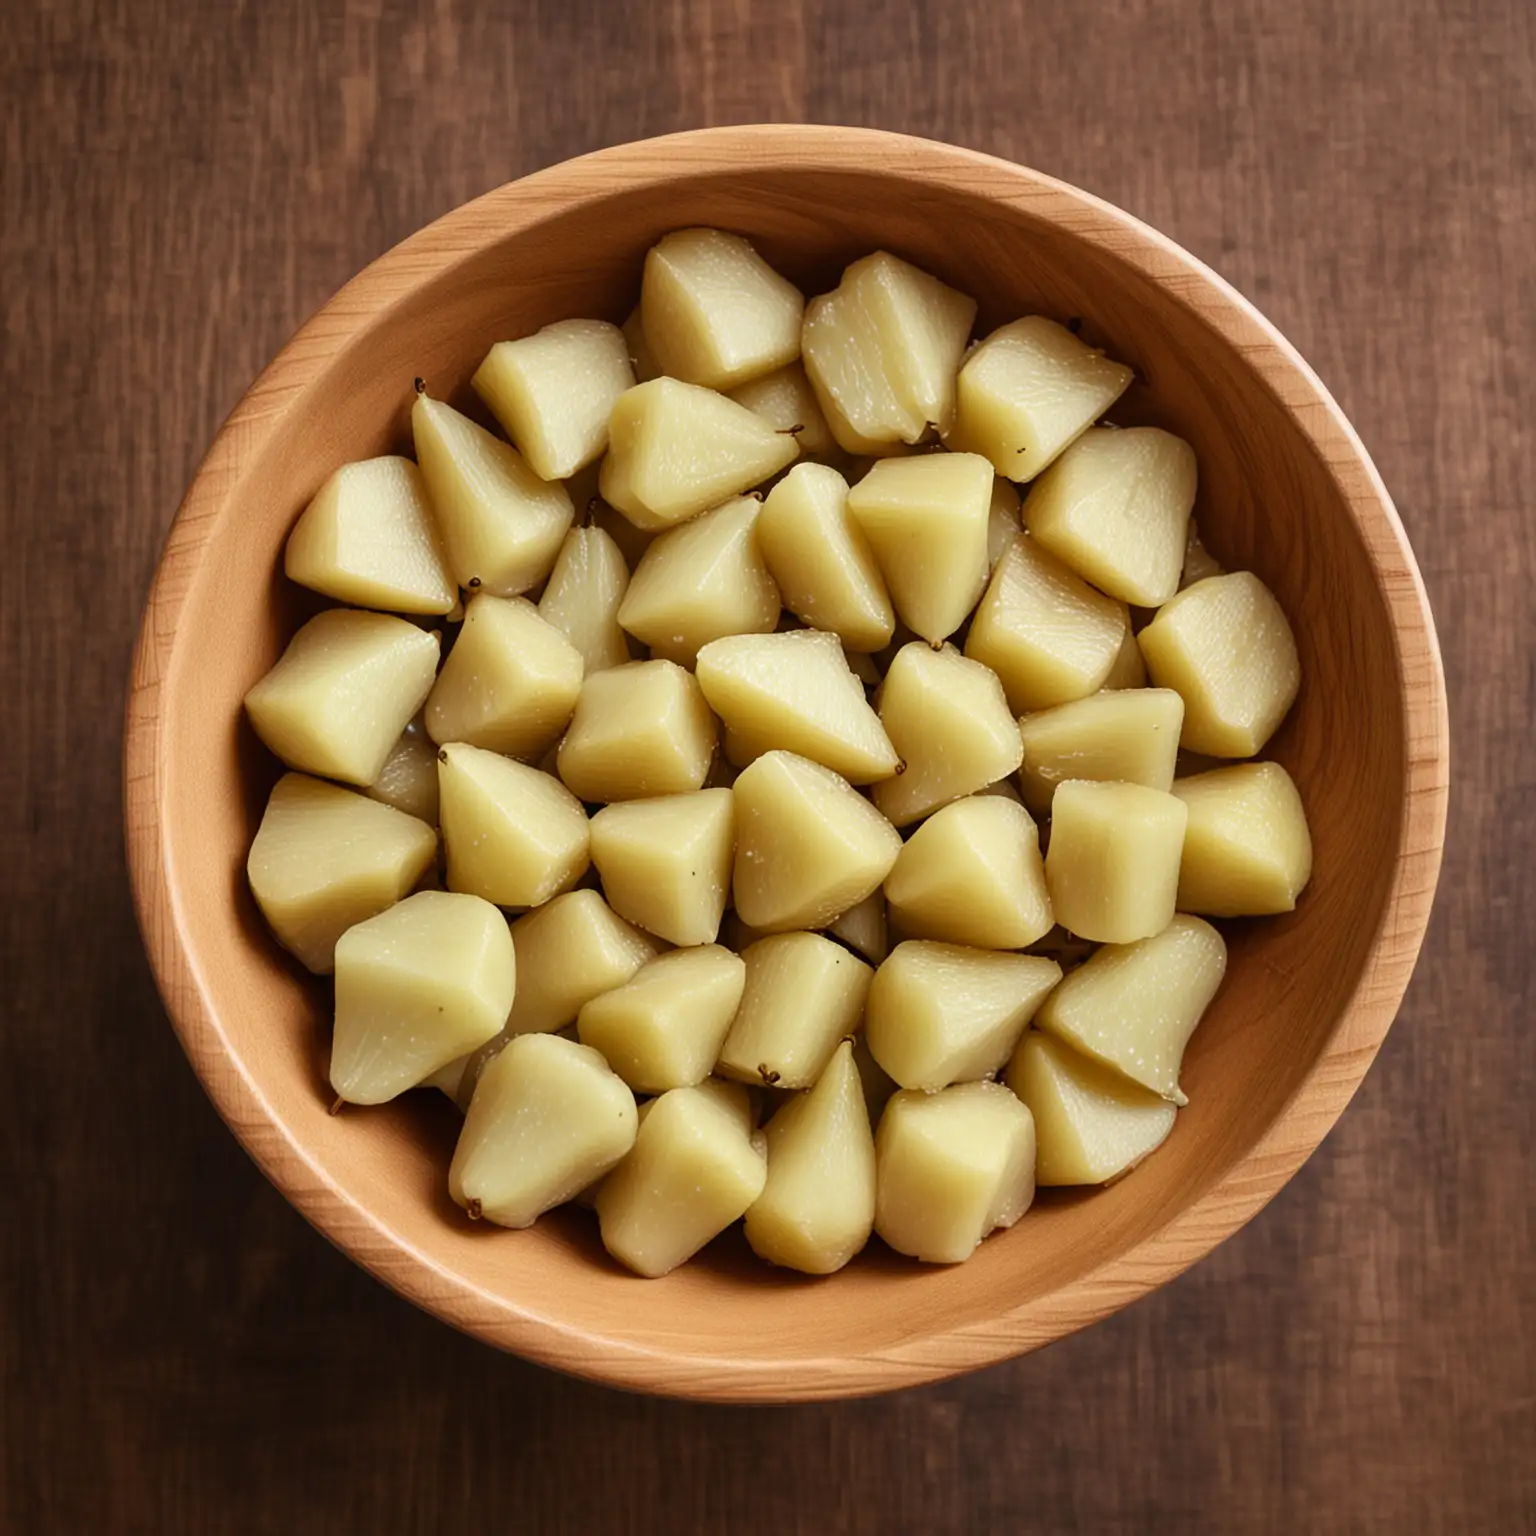 diced pears in a wooden bowl viewed from the top